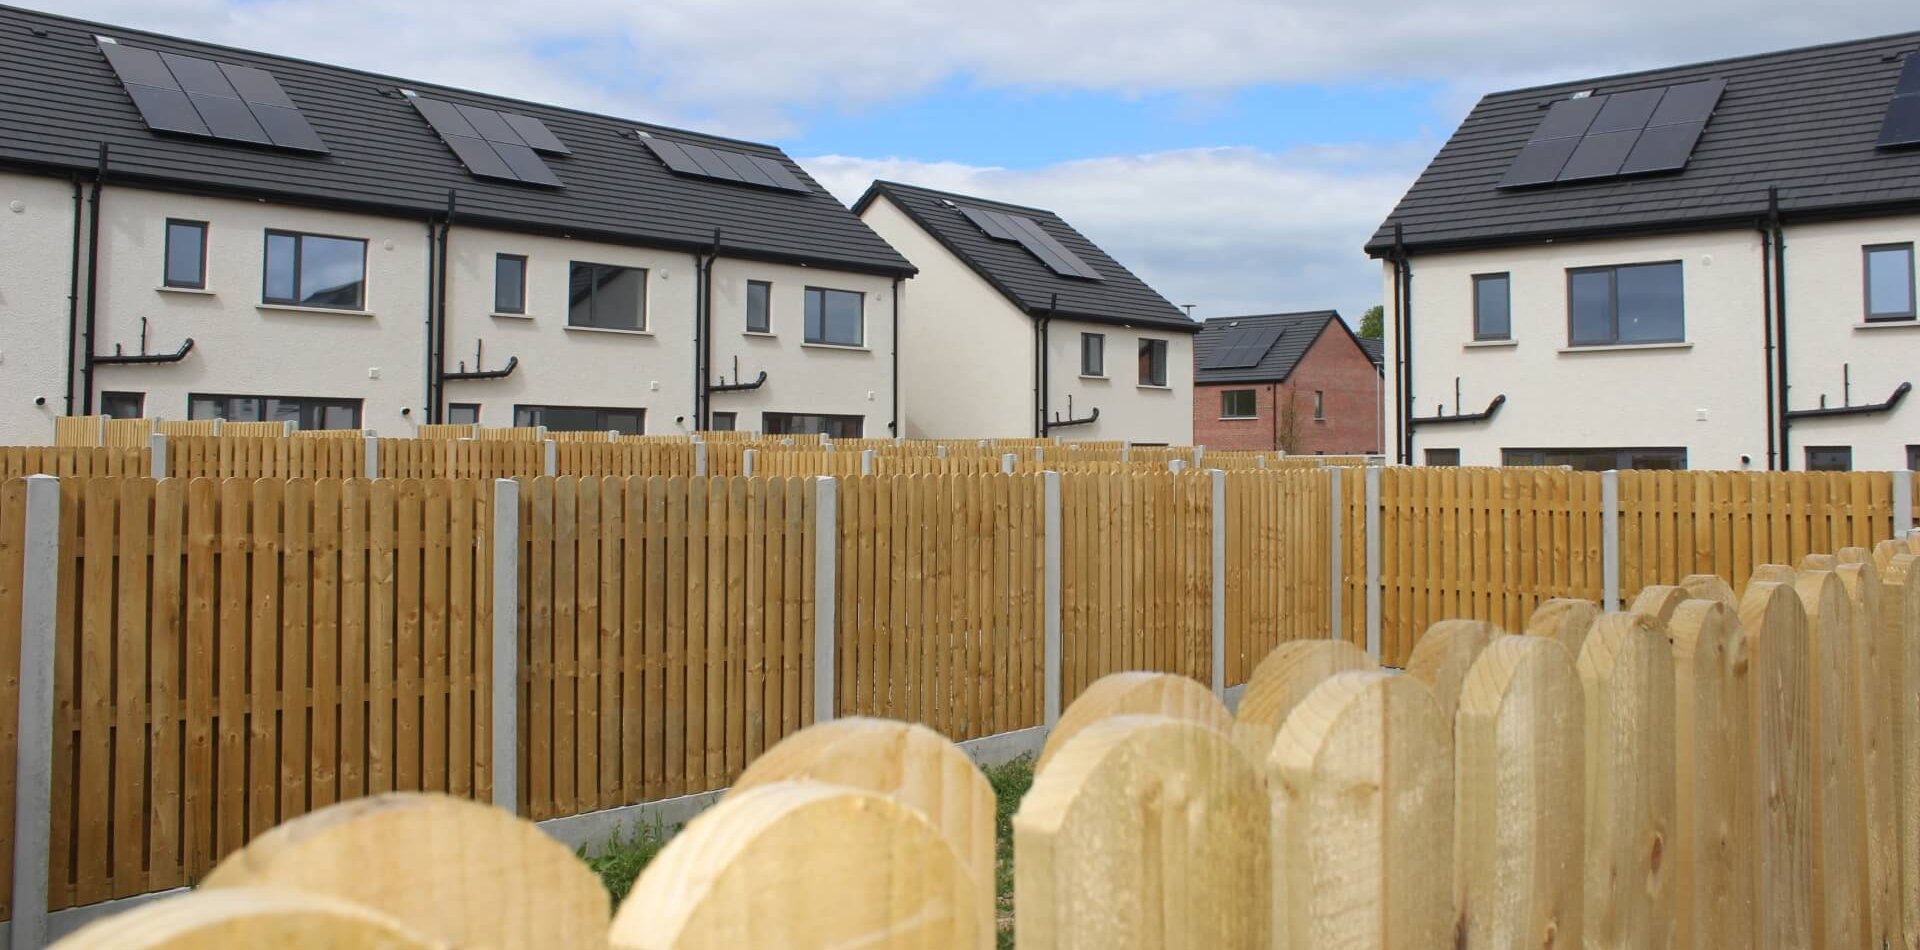 Concrete Post and Hit and Miss Timber Panel Fence, Dunleer Housing Development